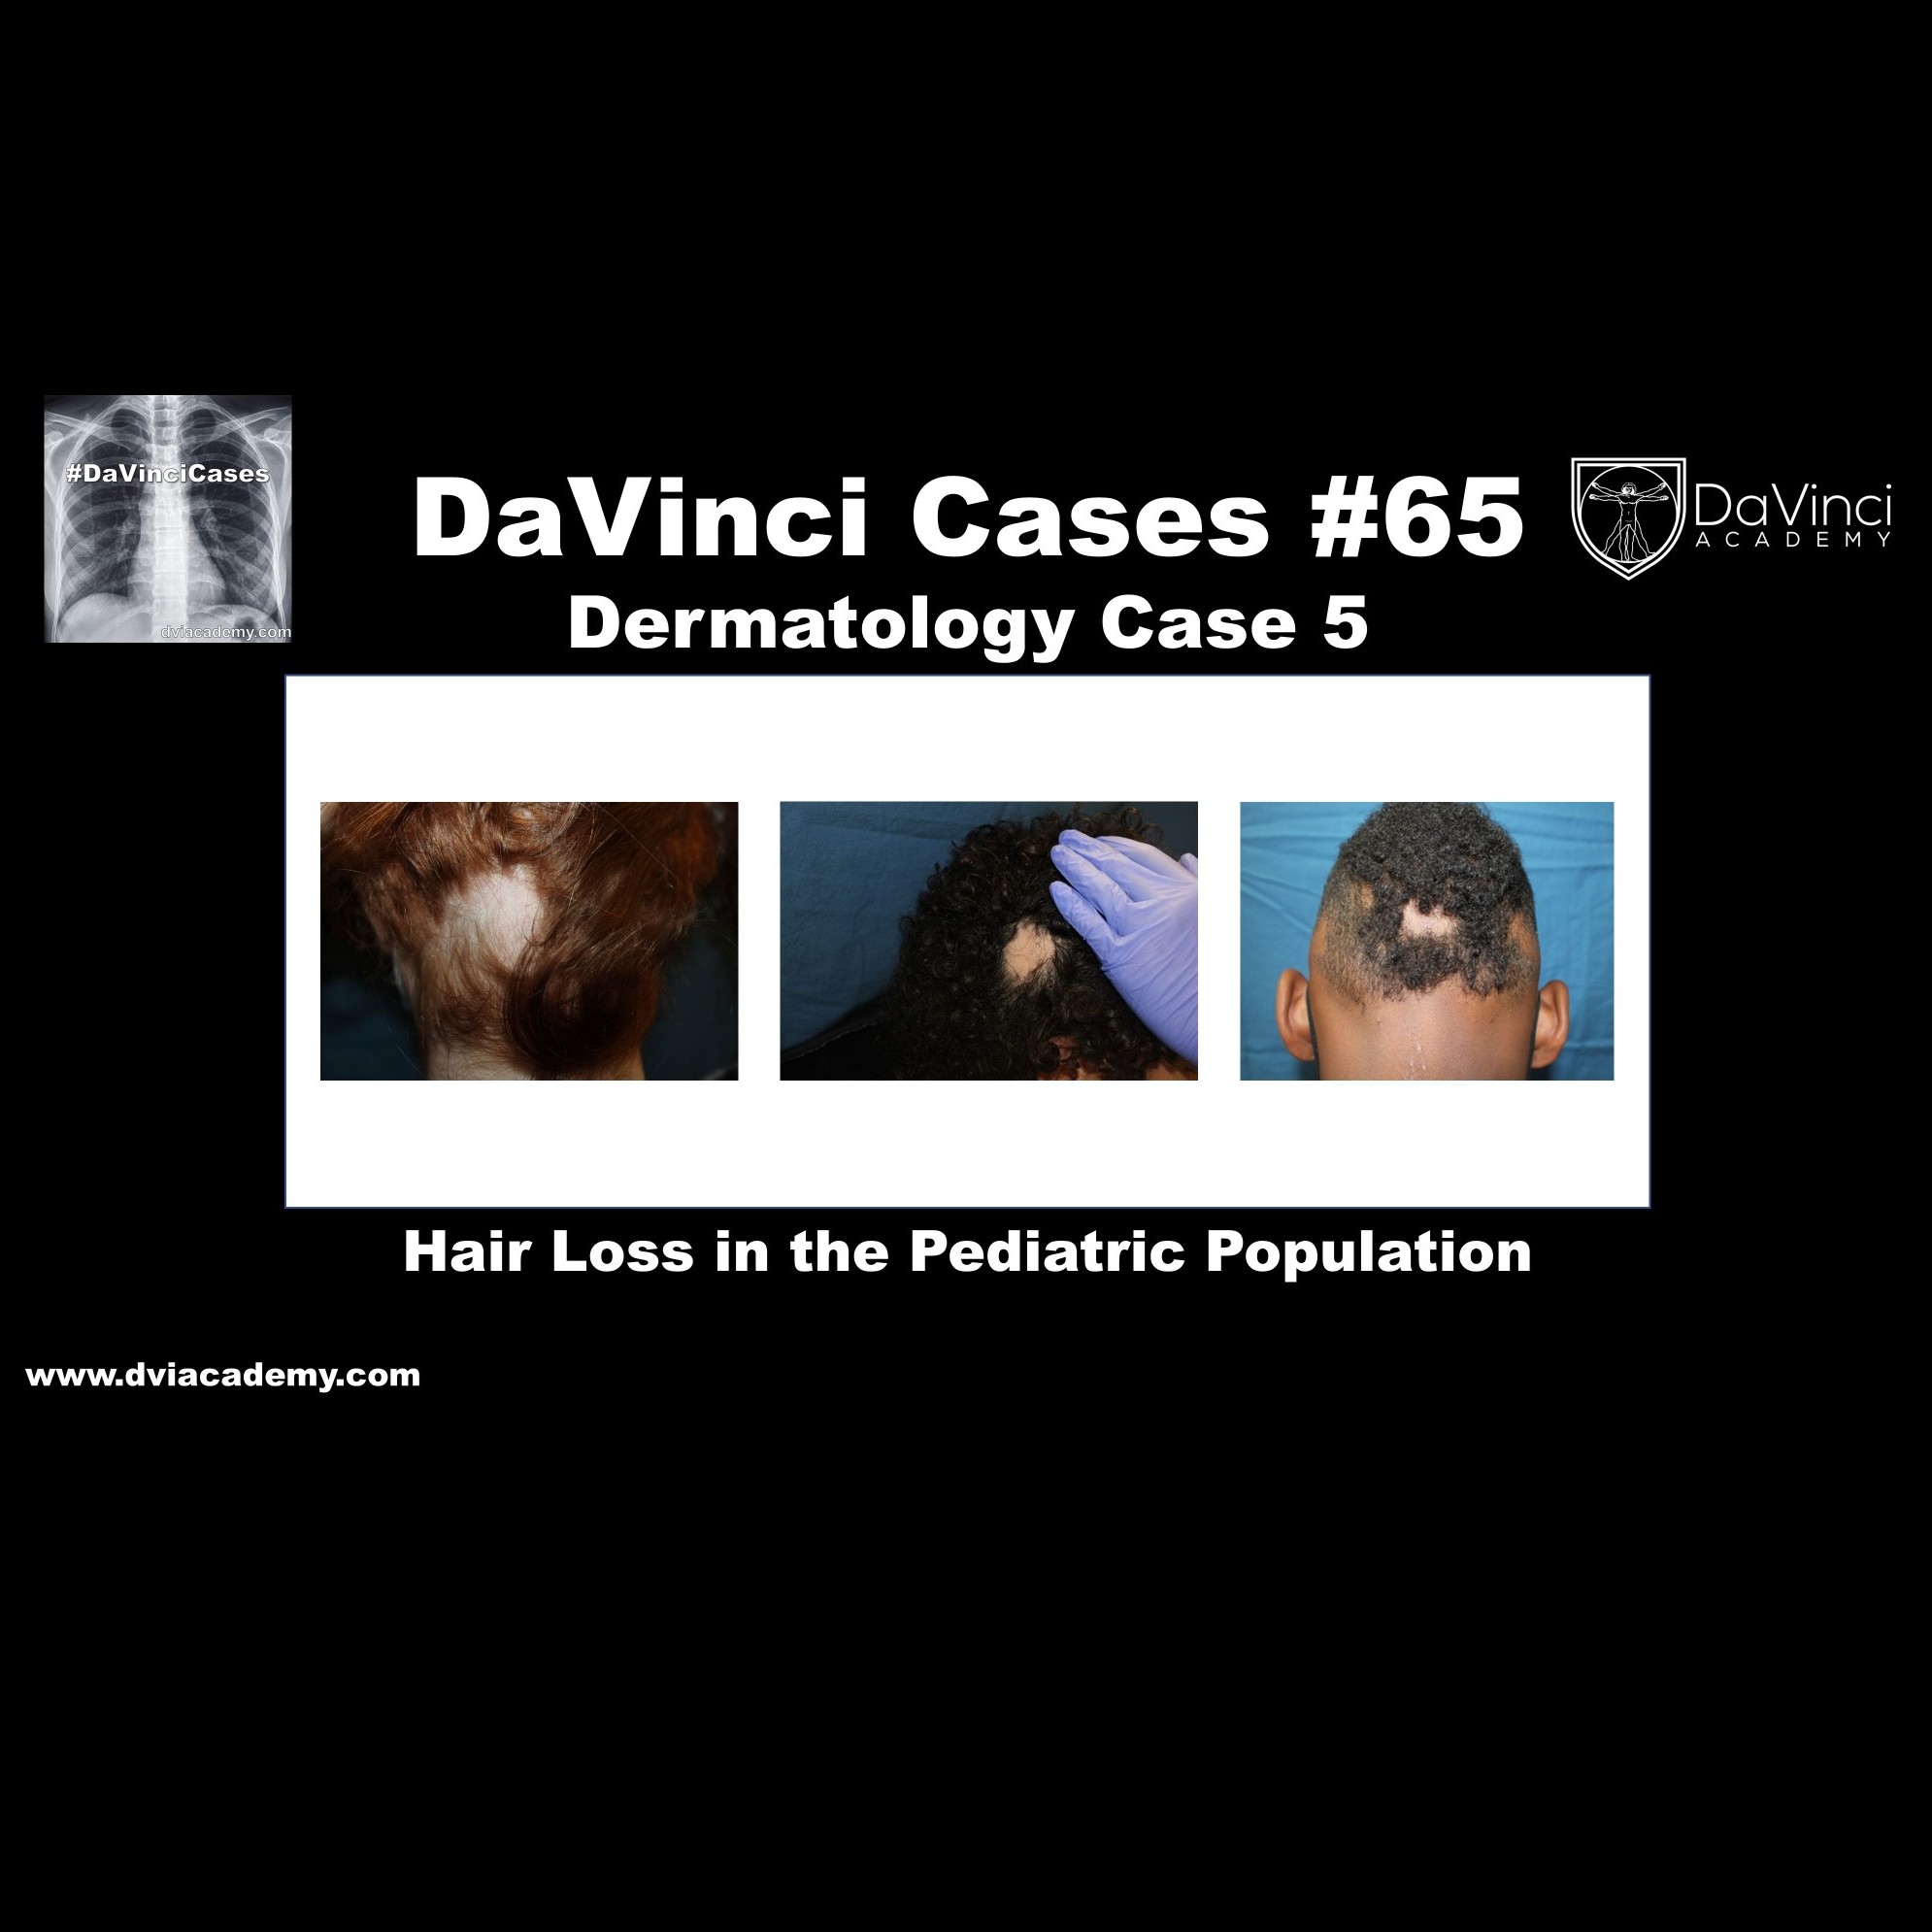 Hair Loss in the Pediatric Population  [#DaVinciCases Dermatology Case 5]